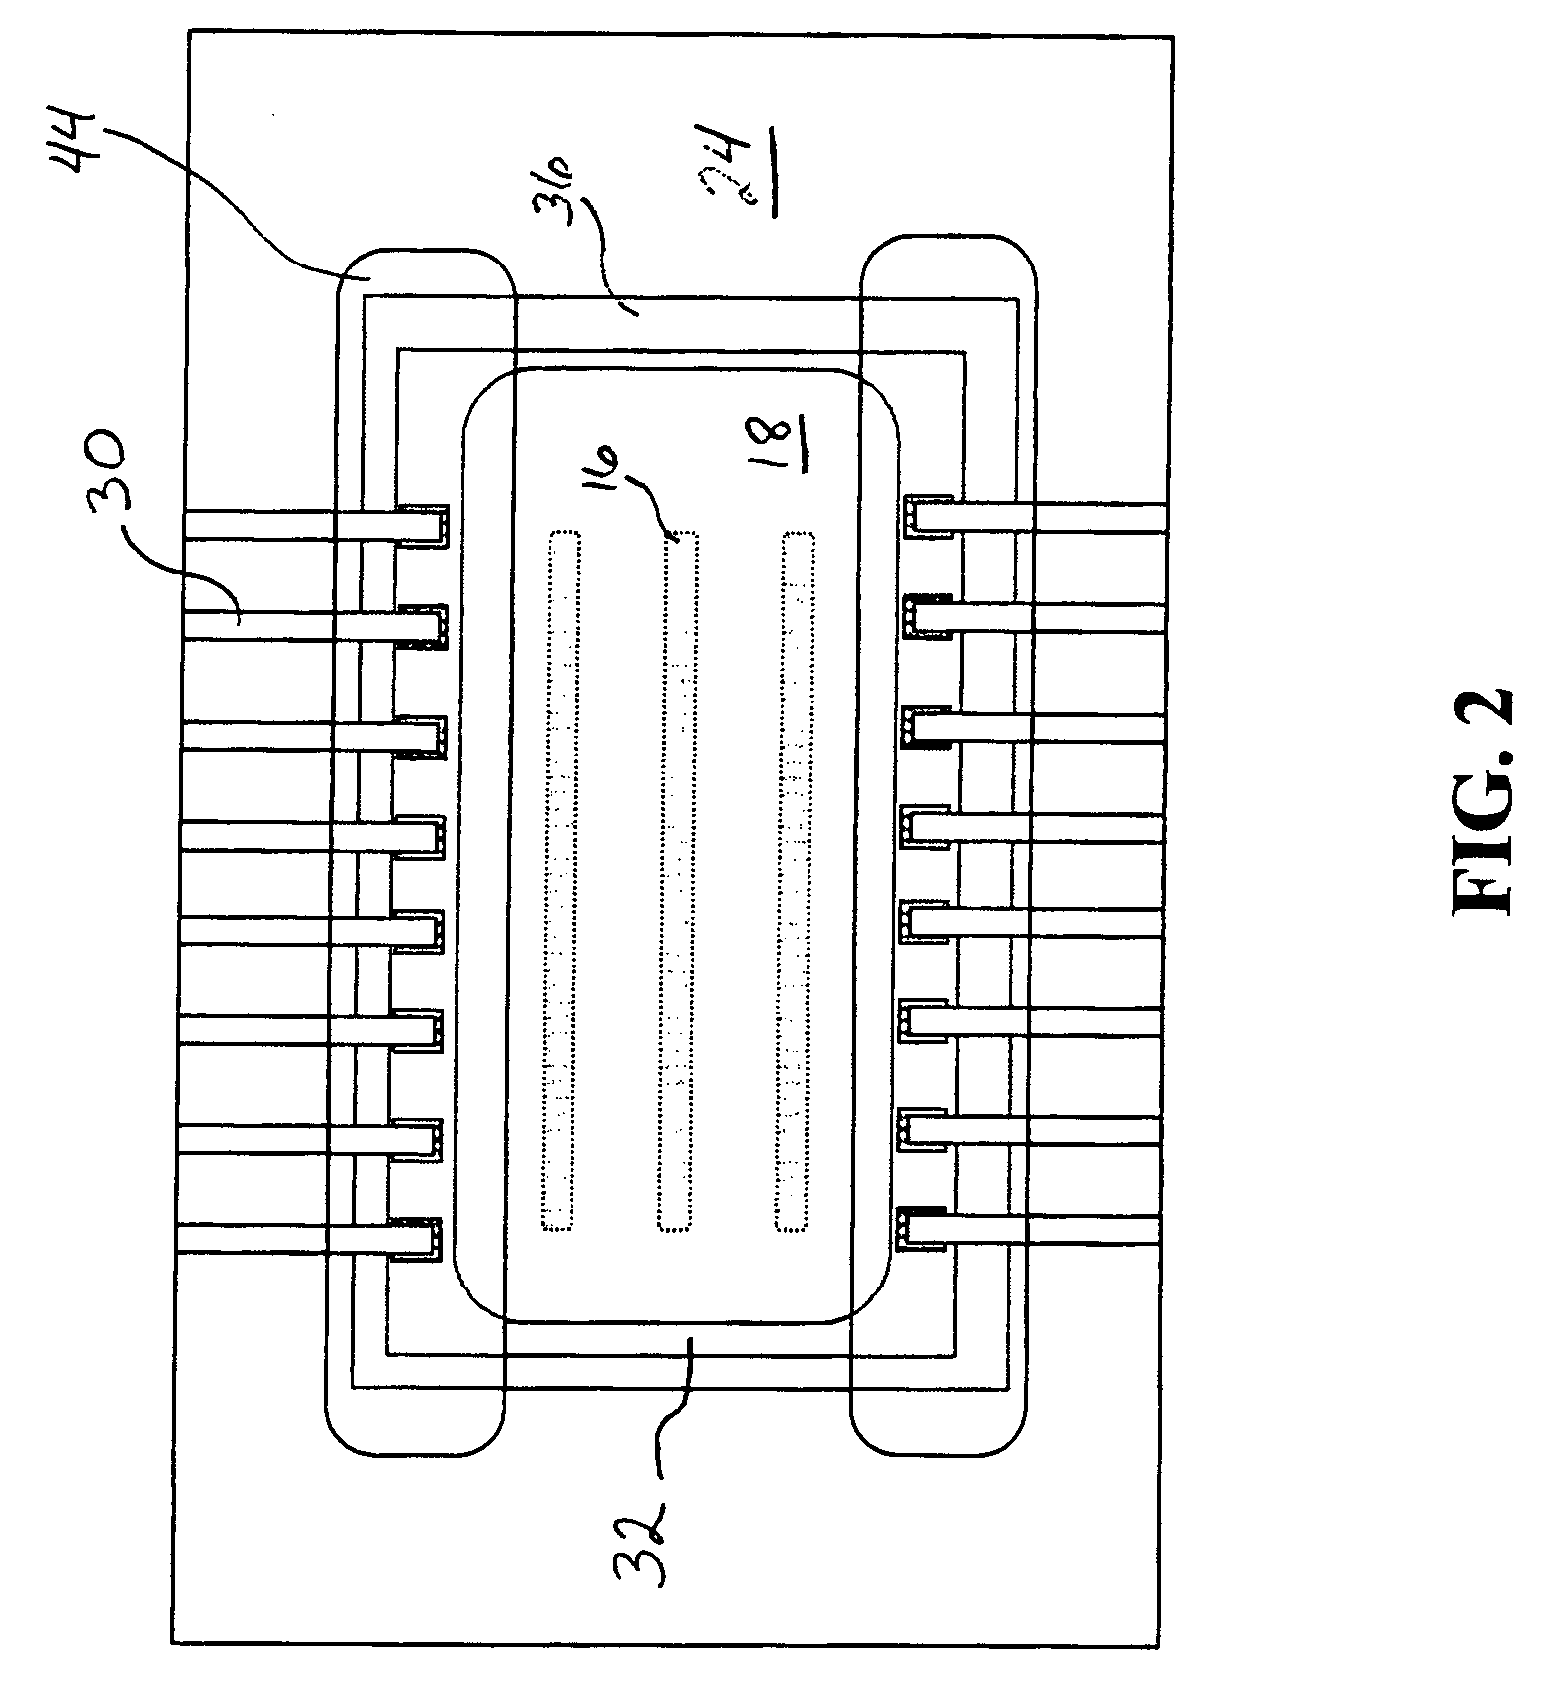 Method of applying an encapsulant material to an ink jet printhead